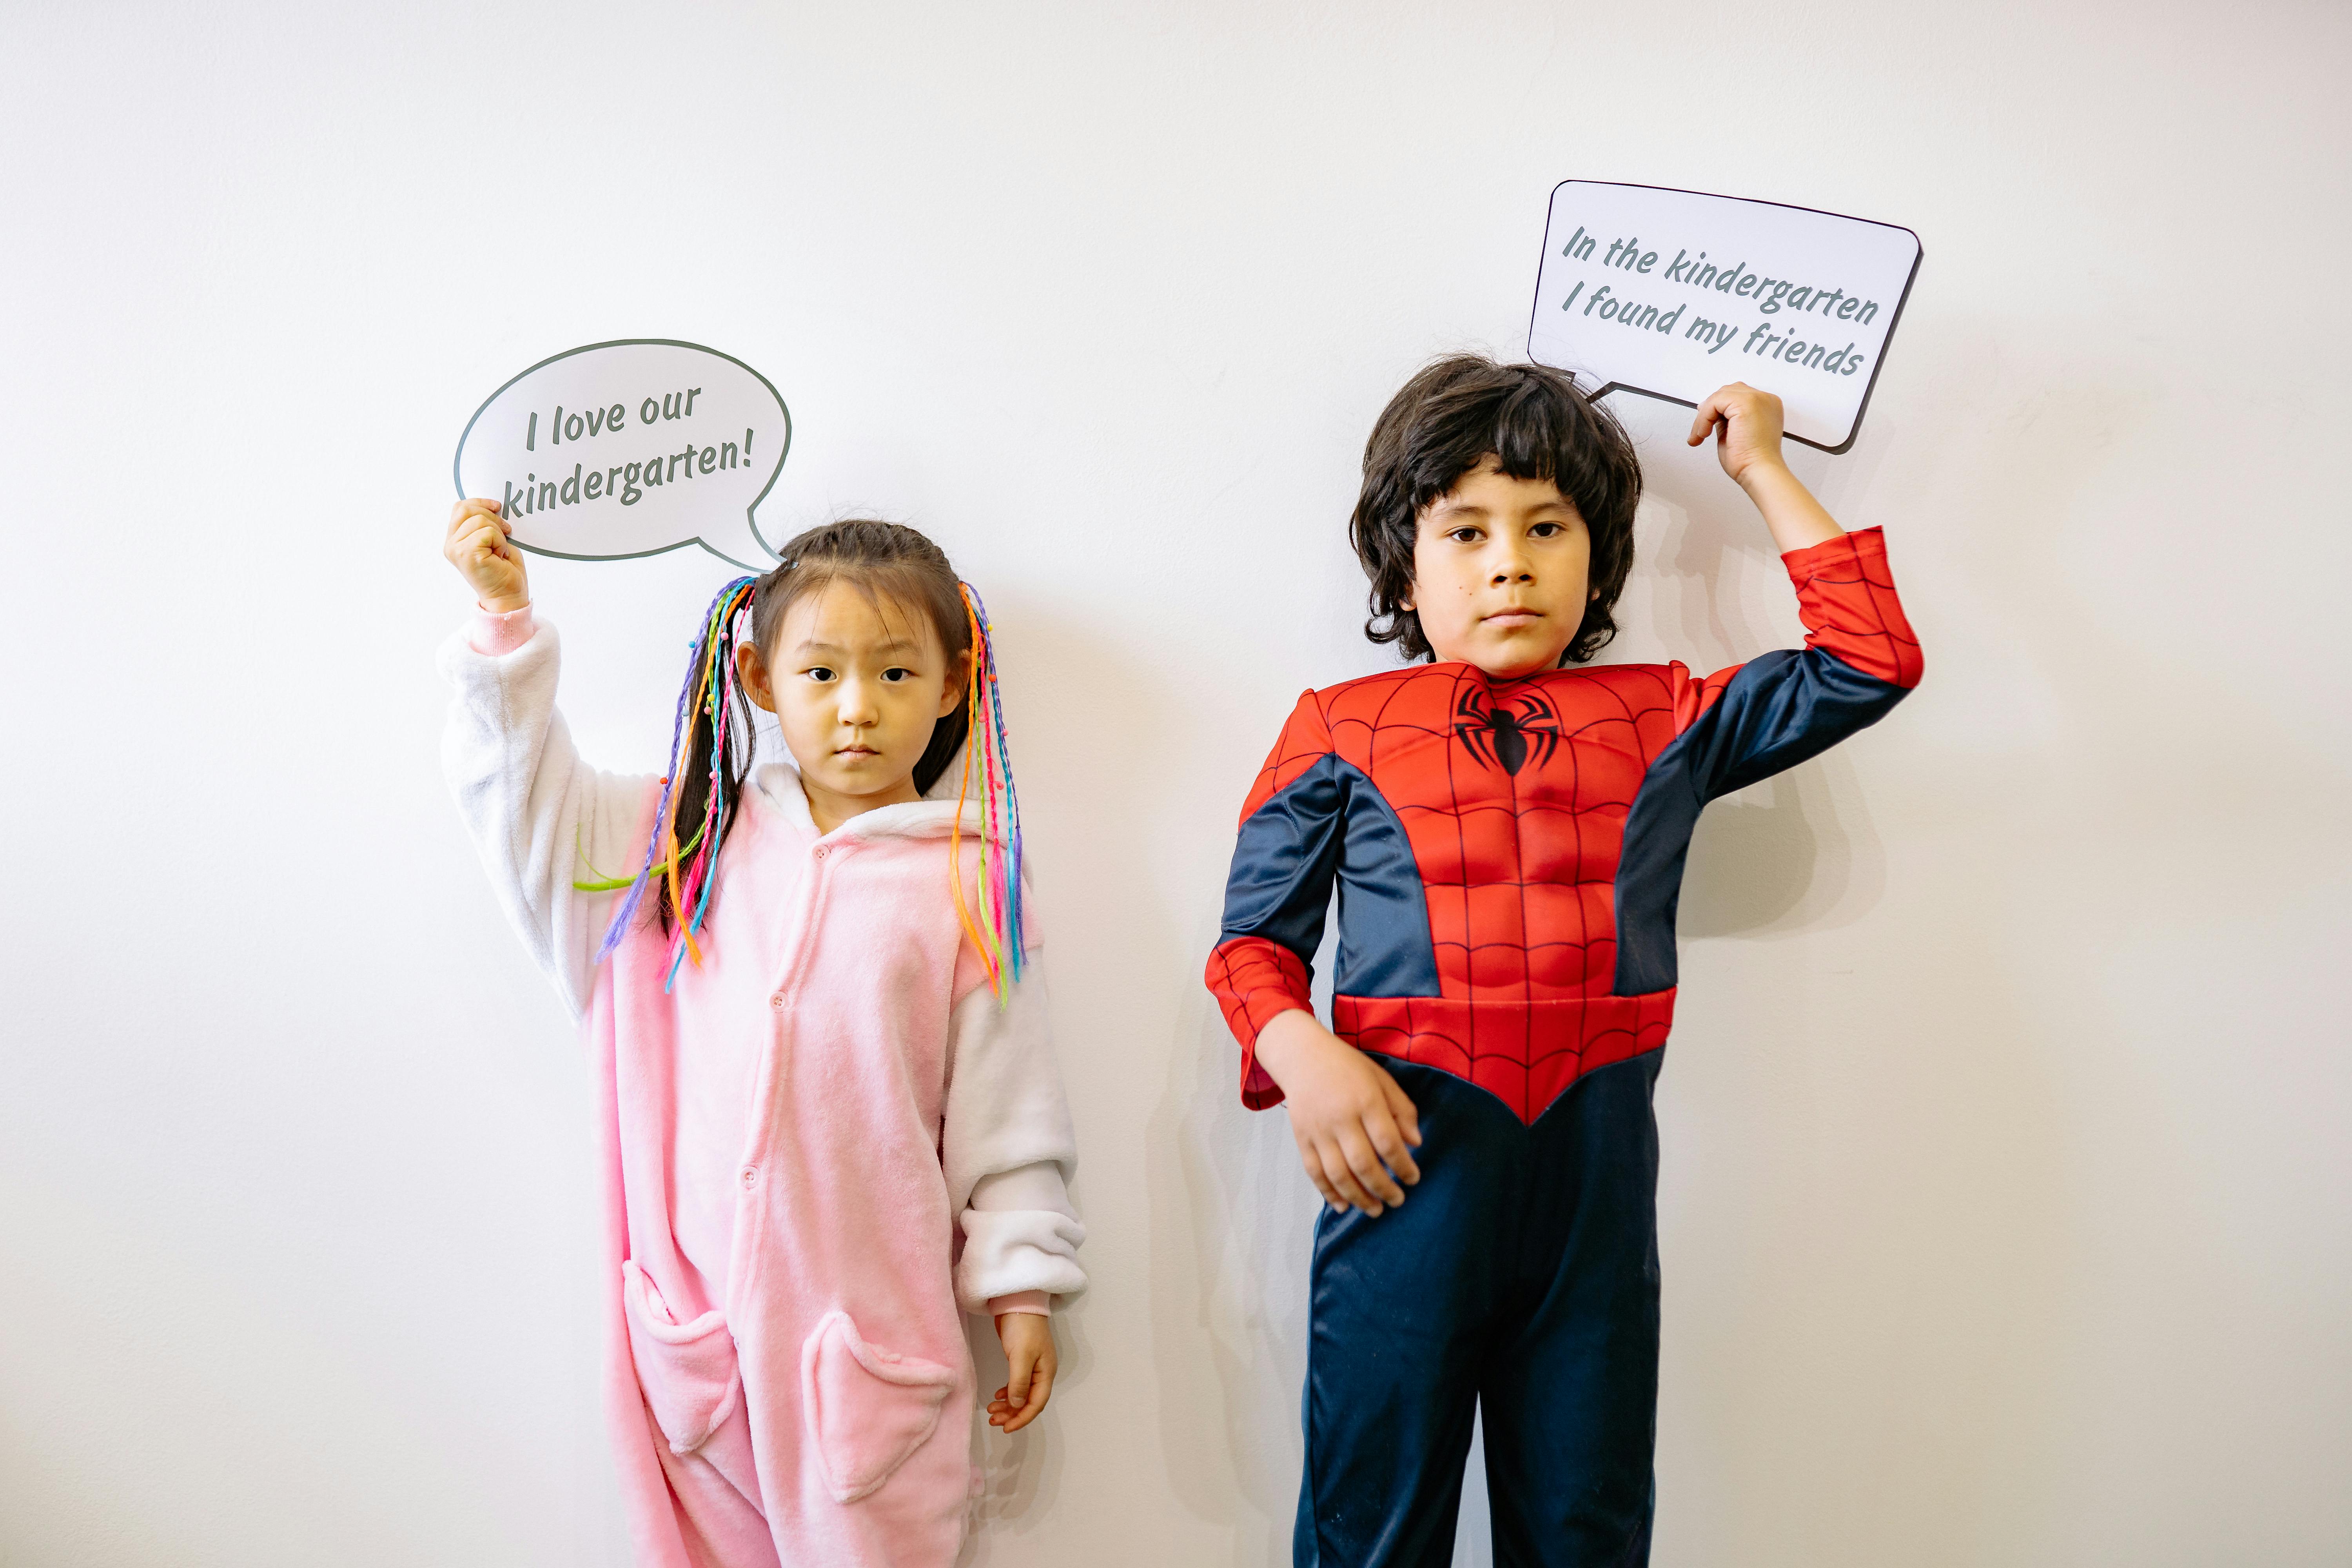 a boy and a girl wearing costumes holding cardboards with text